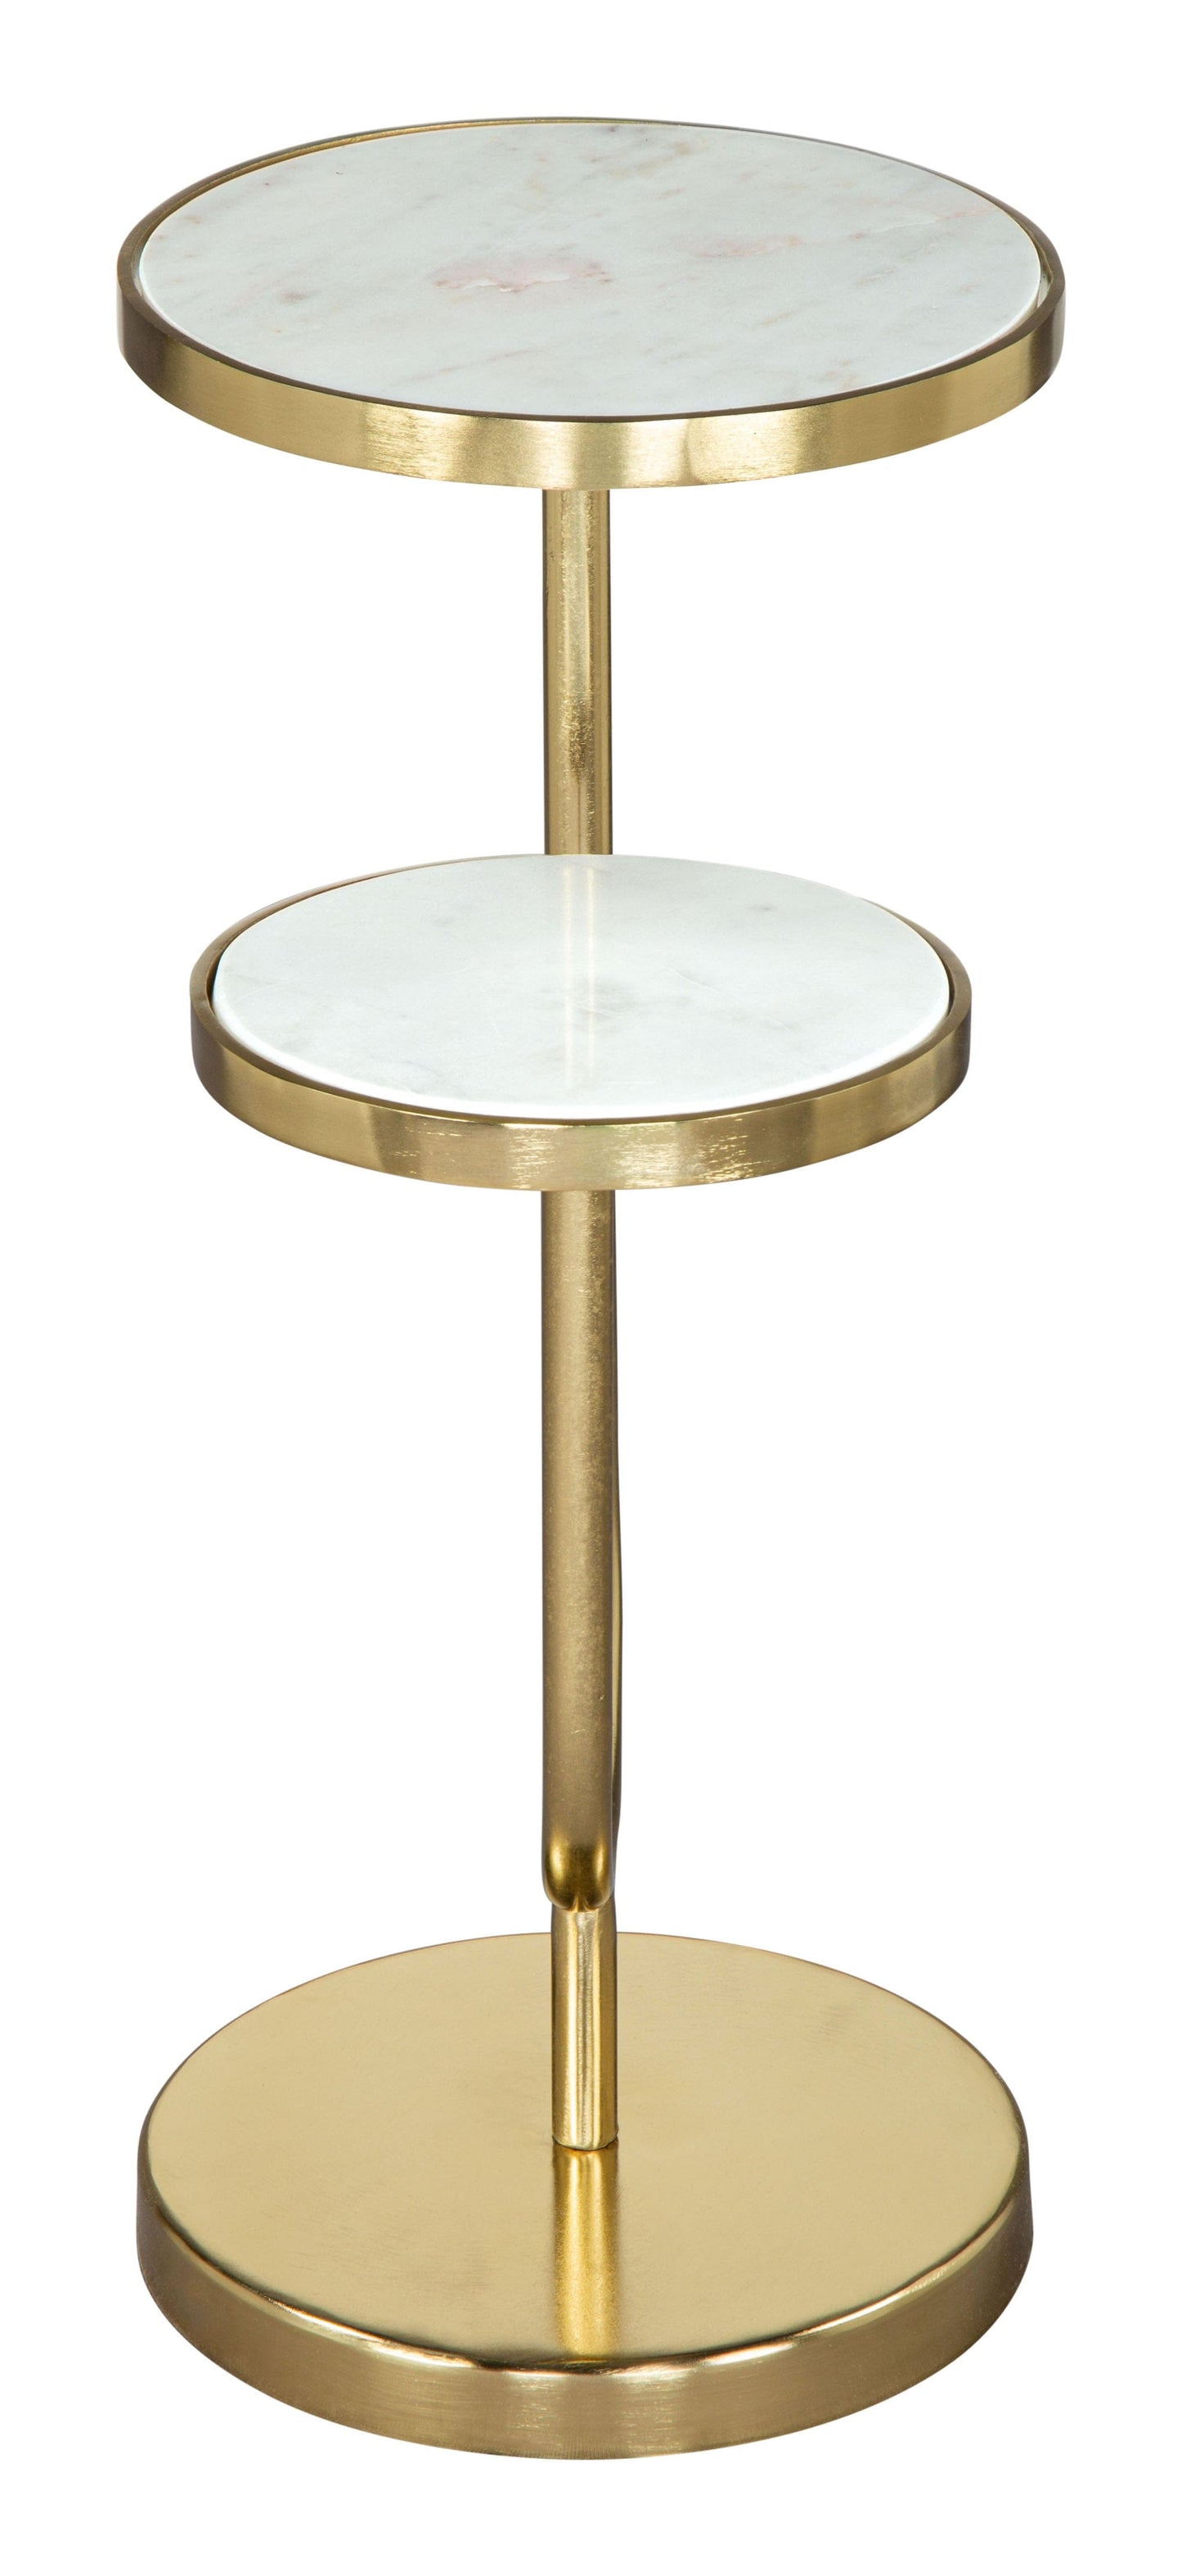 Marble and gold finished side table